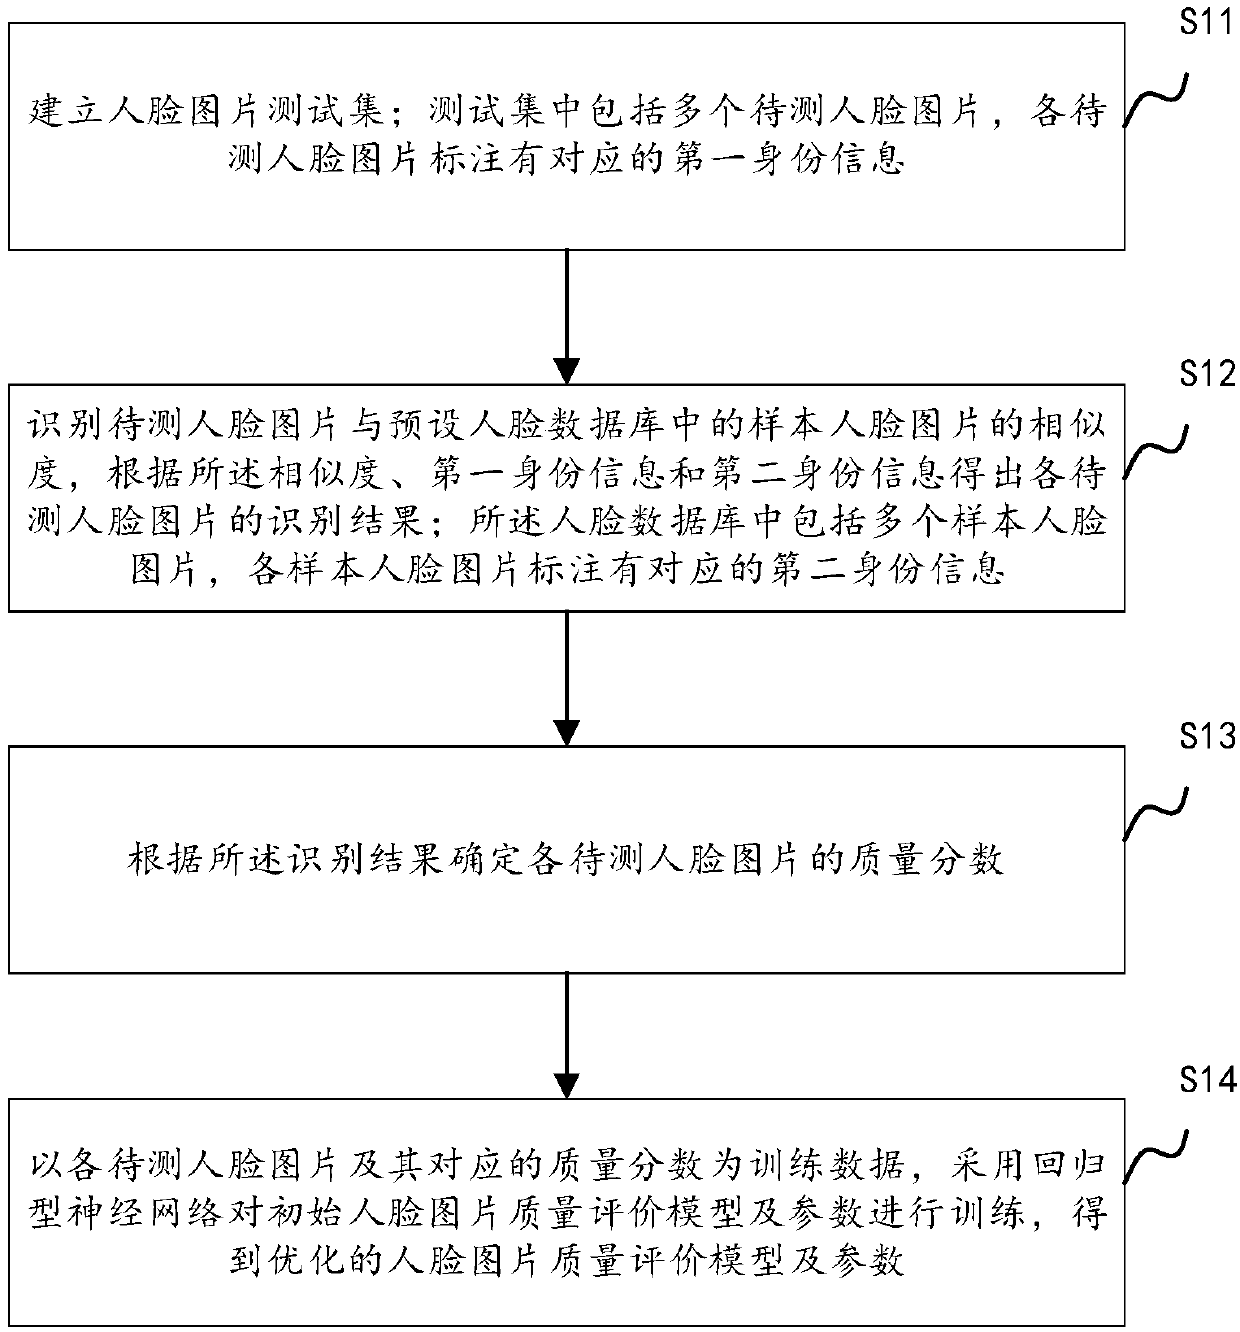 Method and apparatus for optimizing human face picture quality evaluation model